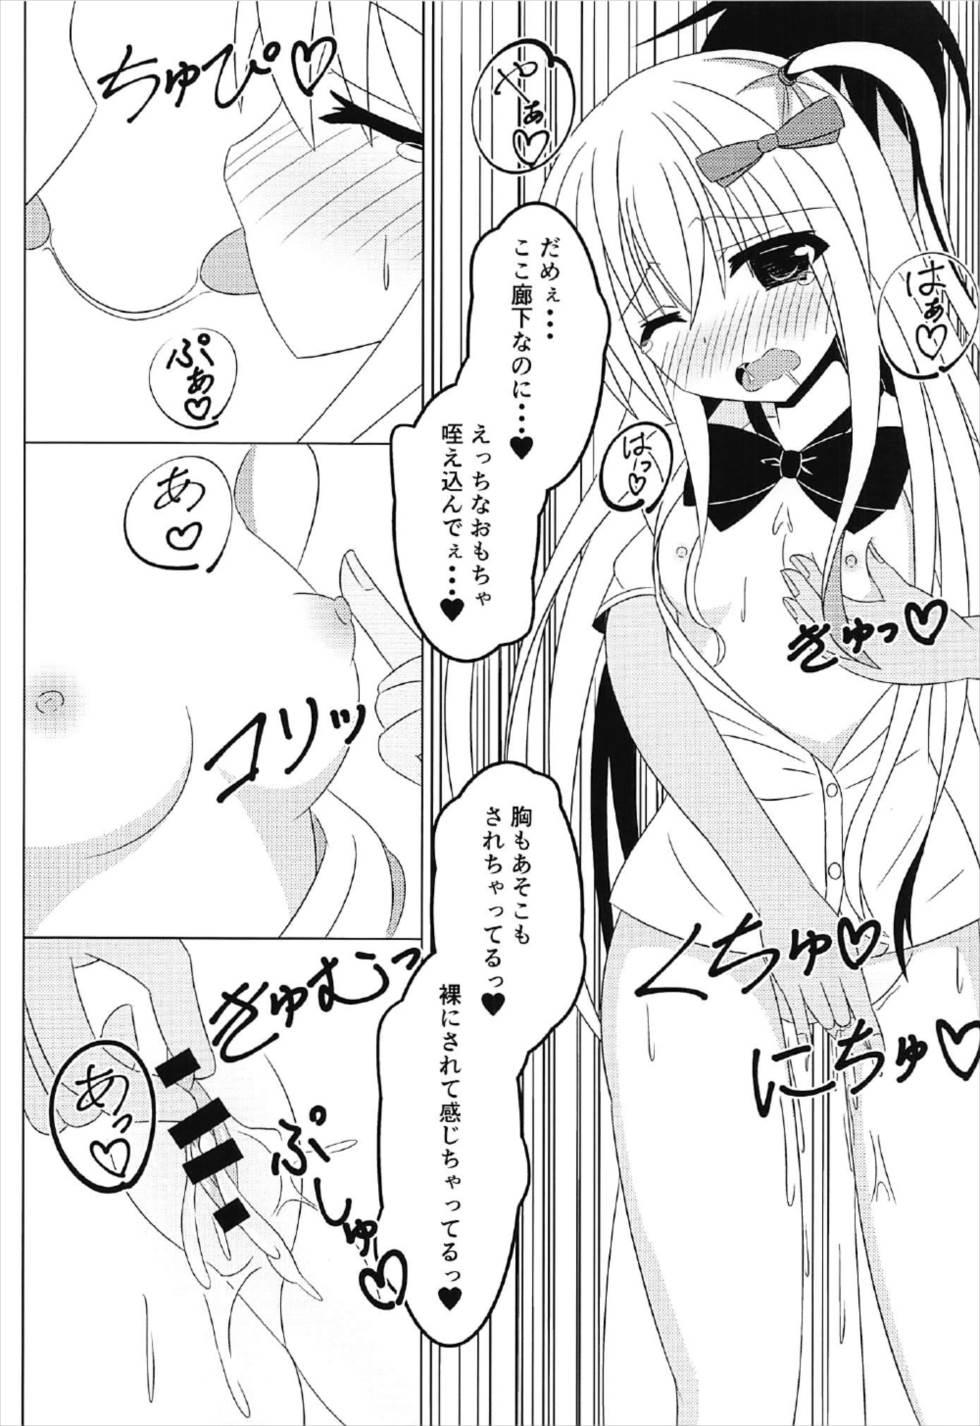 Ink 茉莉と授業を抜け出して - Girl friend beta Swallowing - Page 9